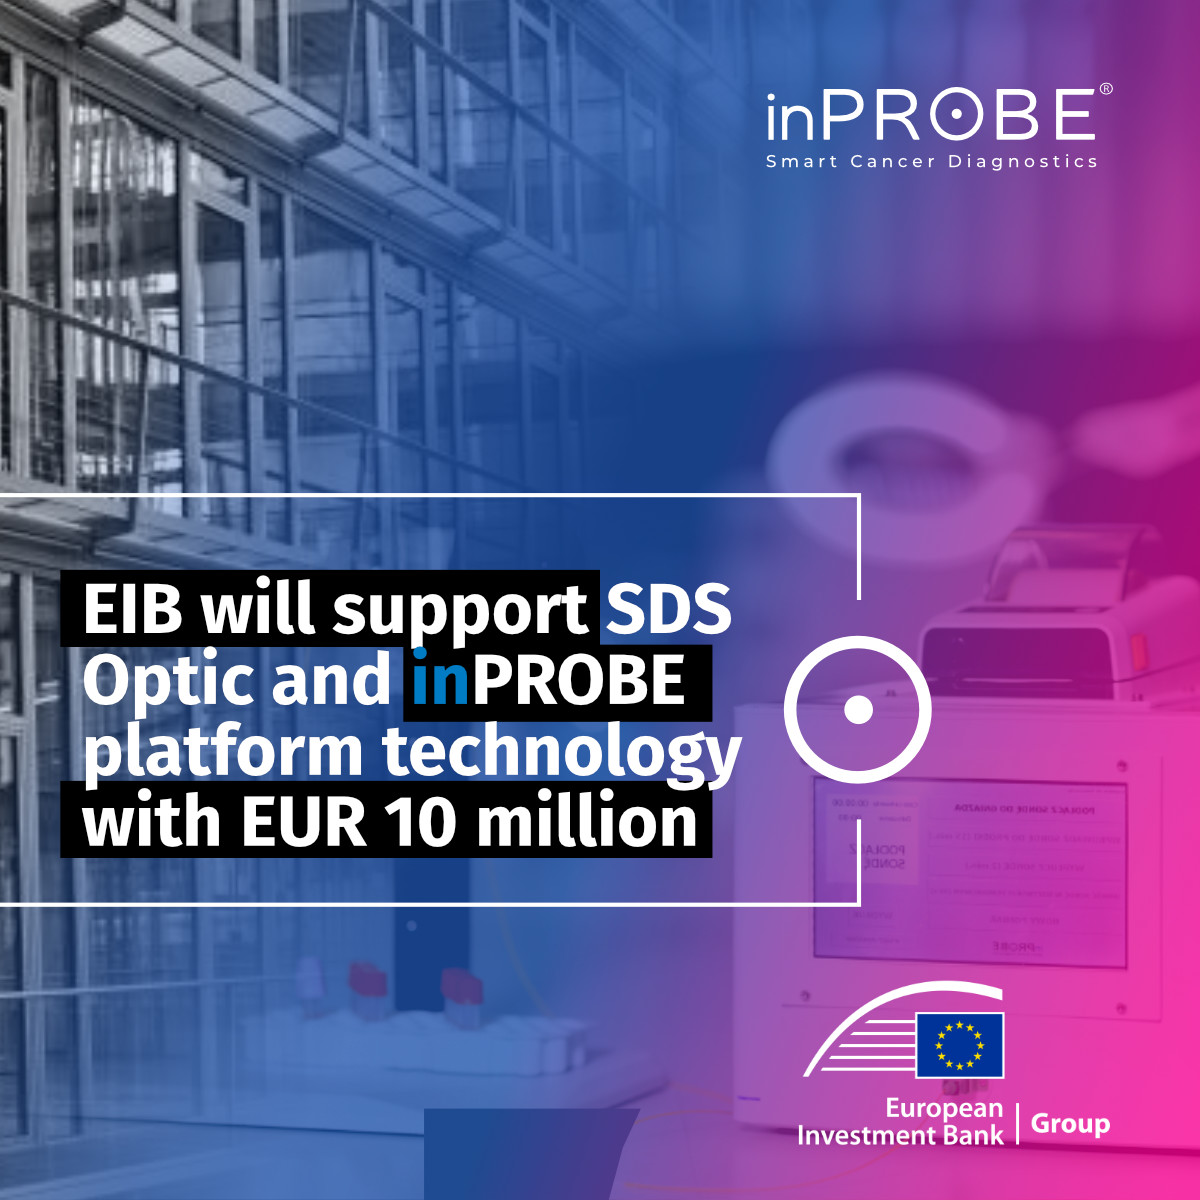 ⭐️🇪🇺 EIB will support @SDS_Optic and #inPROBE platform technology with EUR 10 million! READ MORE: 🔗 sdsoptic.pl/en/eib-to-supp… CHECK OUT #EIB PRESS RELEASE 🔗 eib.org/en/press/all/2…